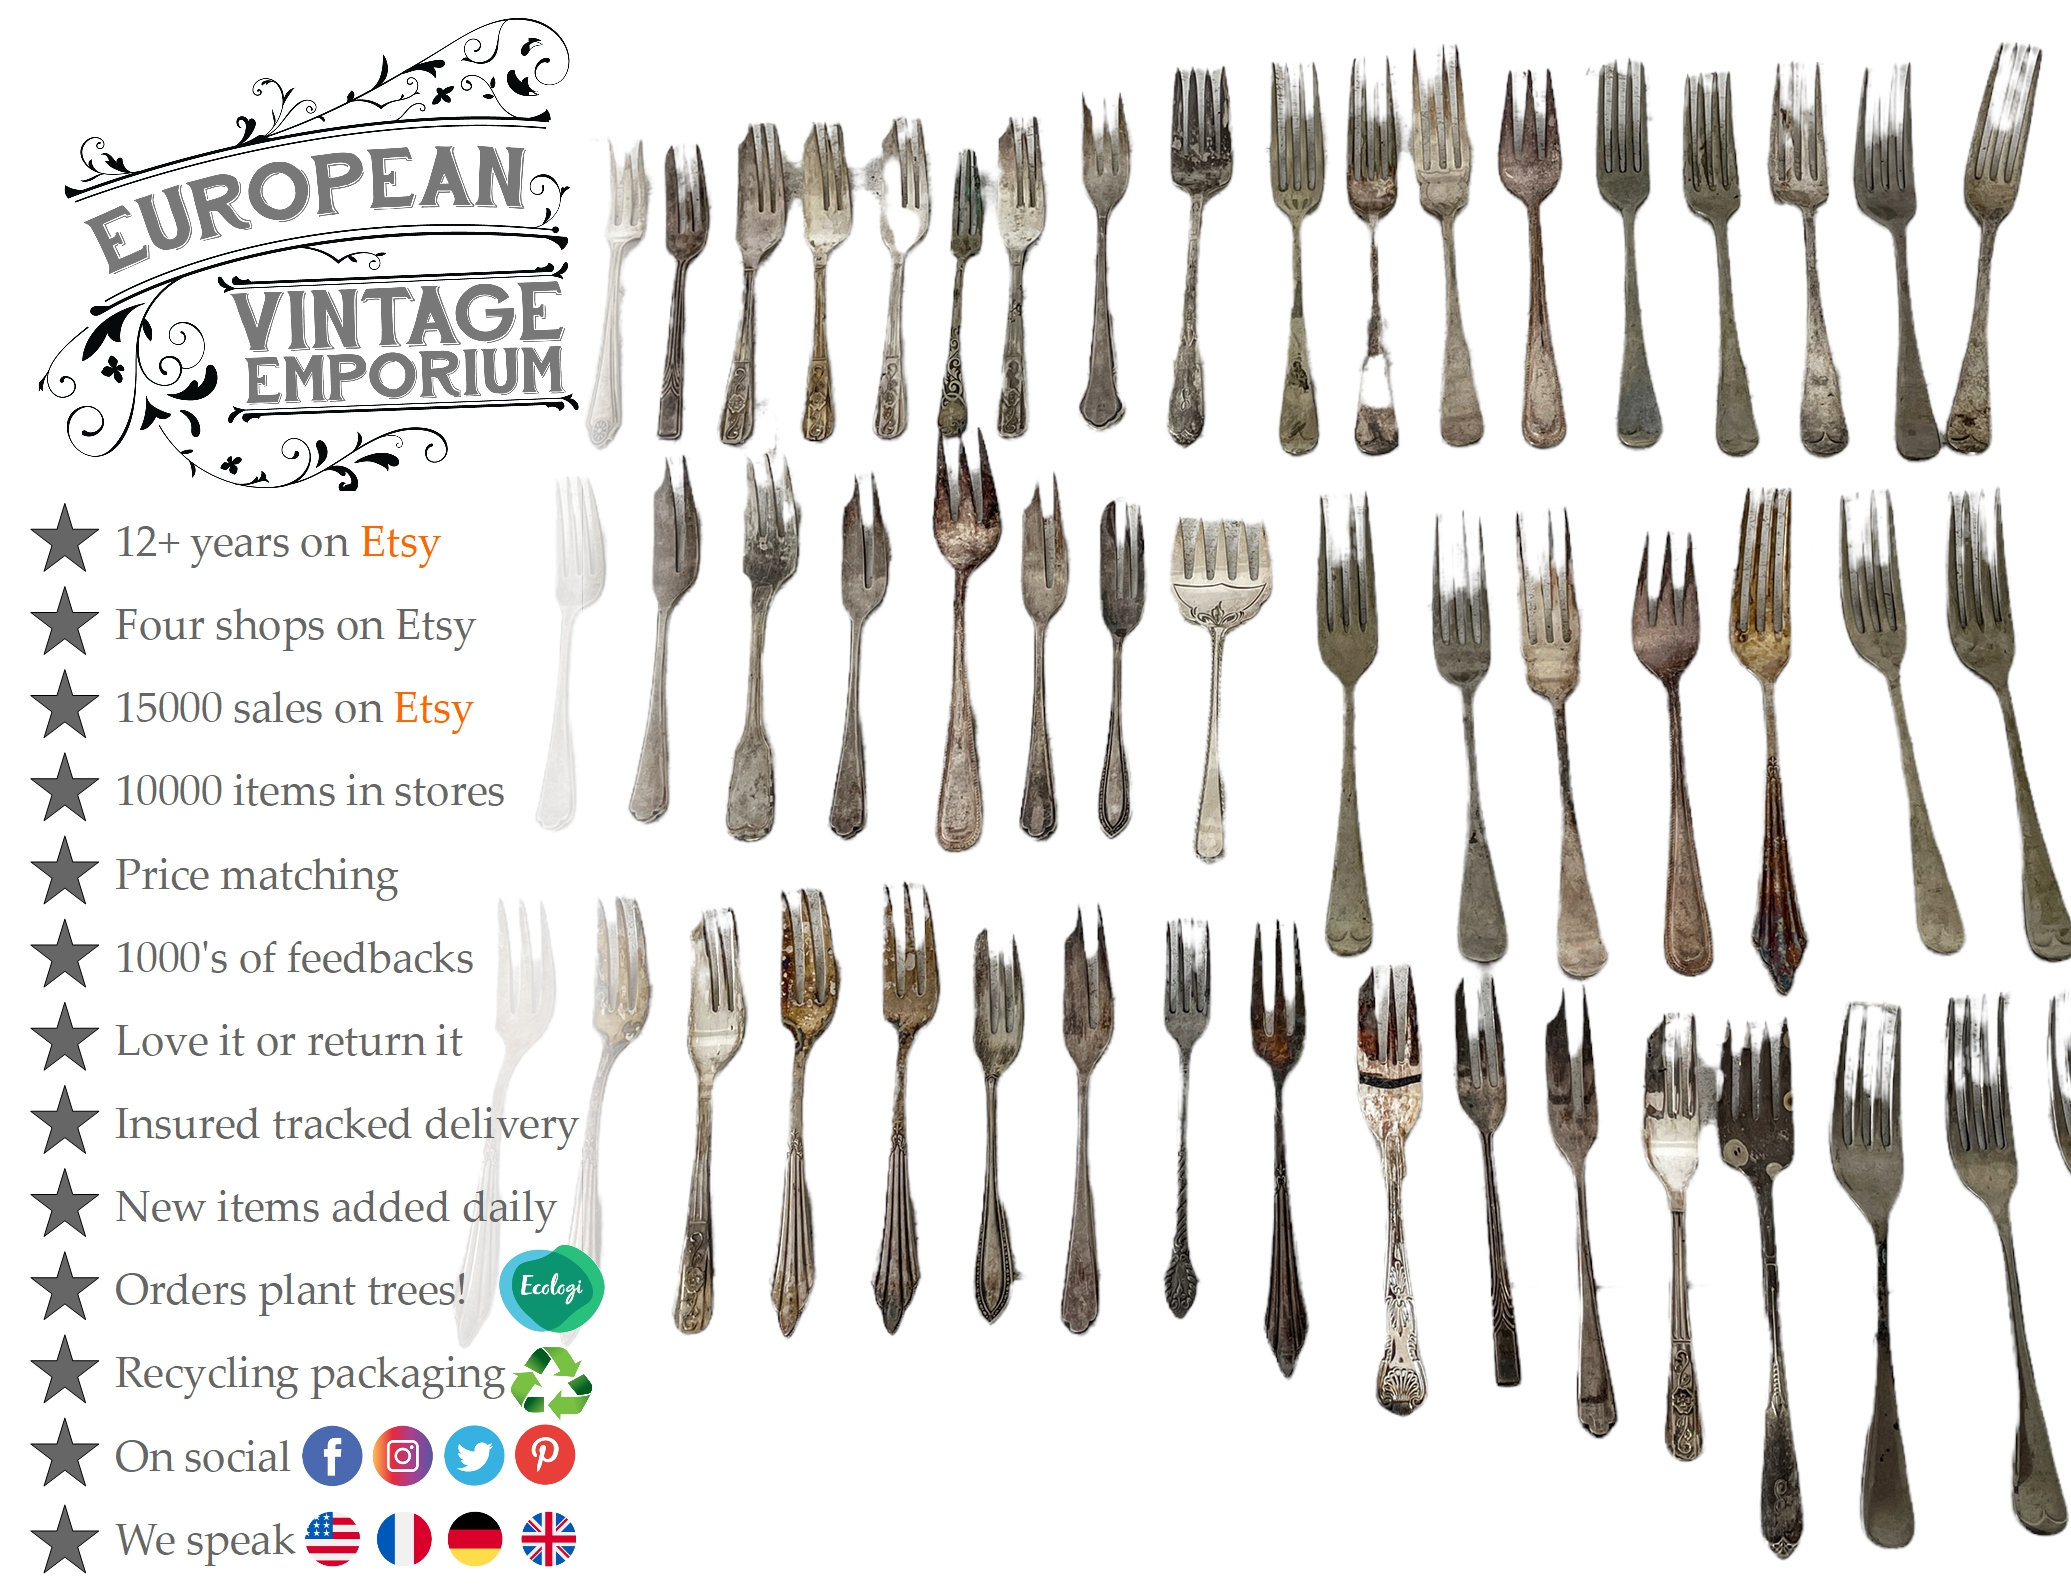 10 Bizarre Types of Antique Flatware You Never Knew Existed